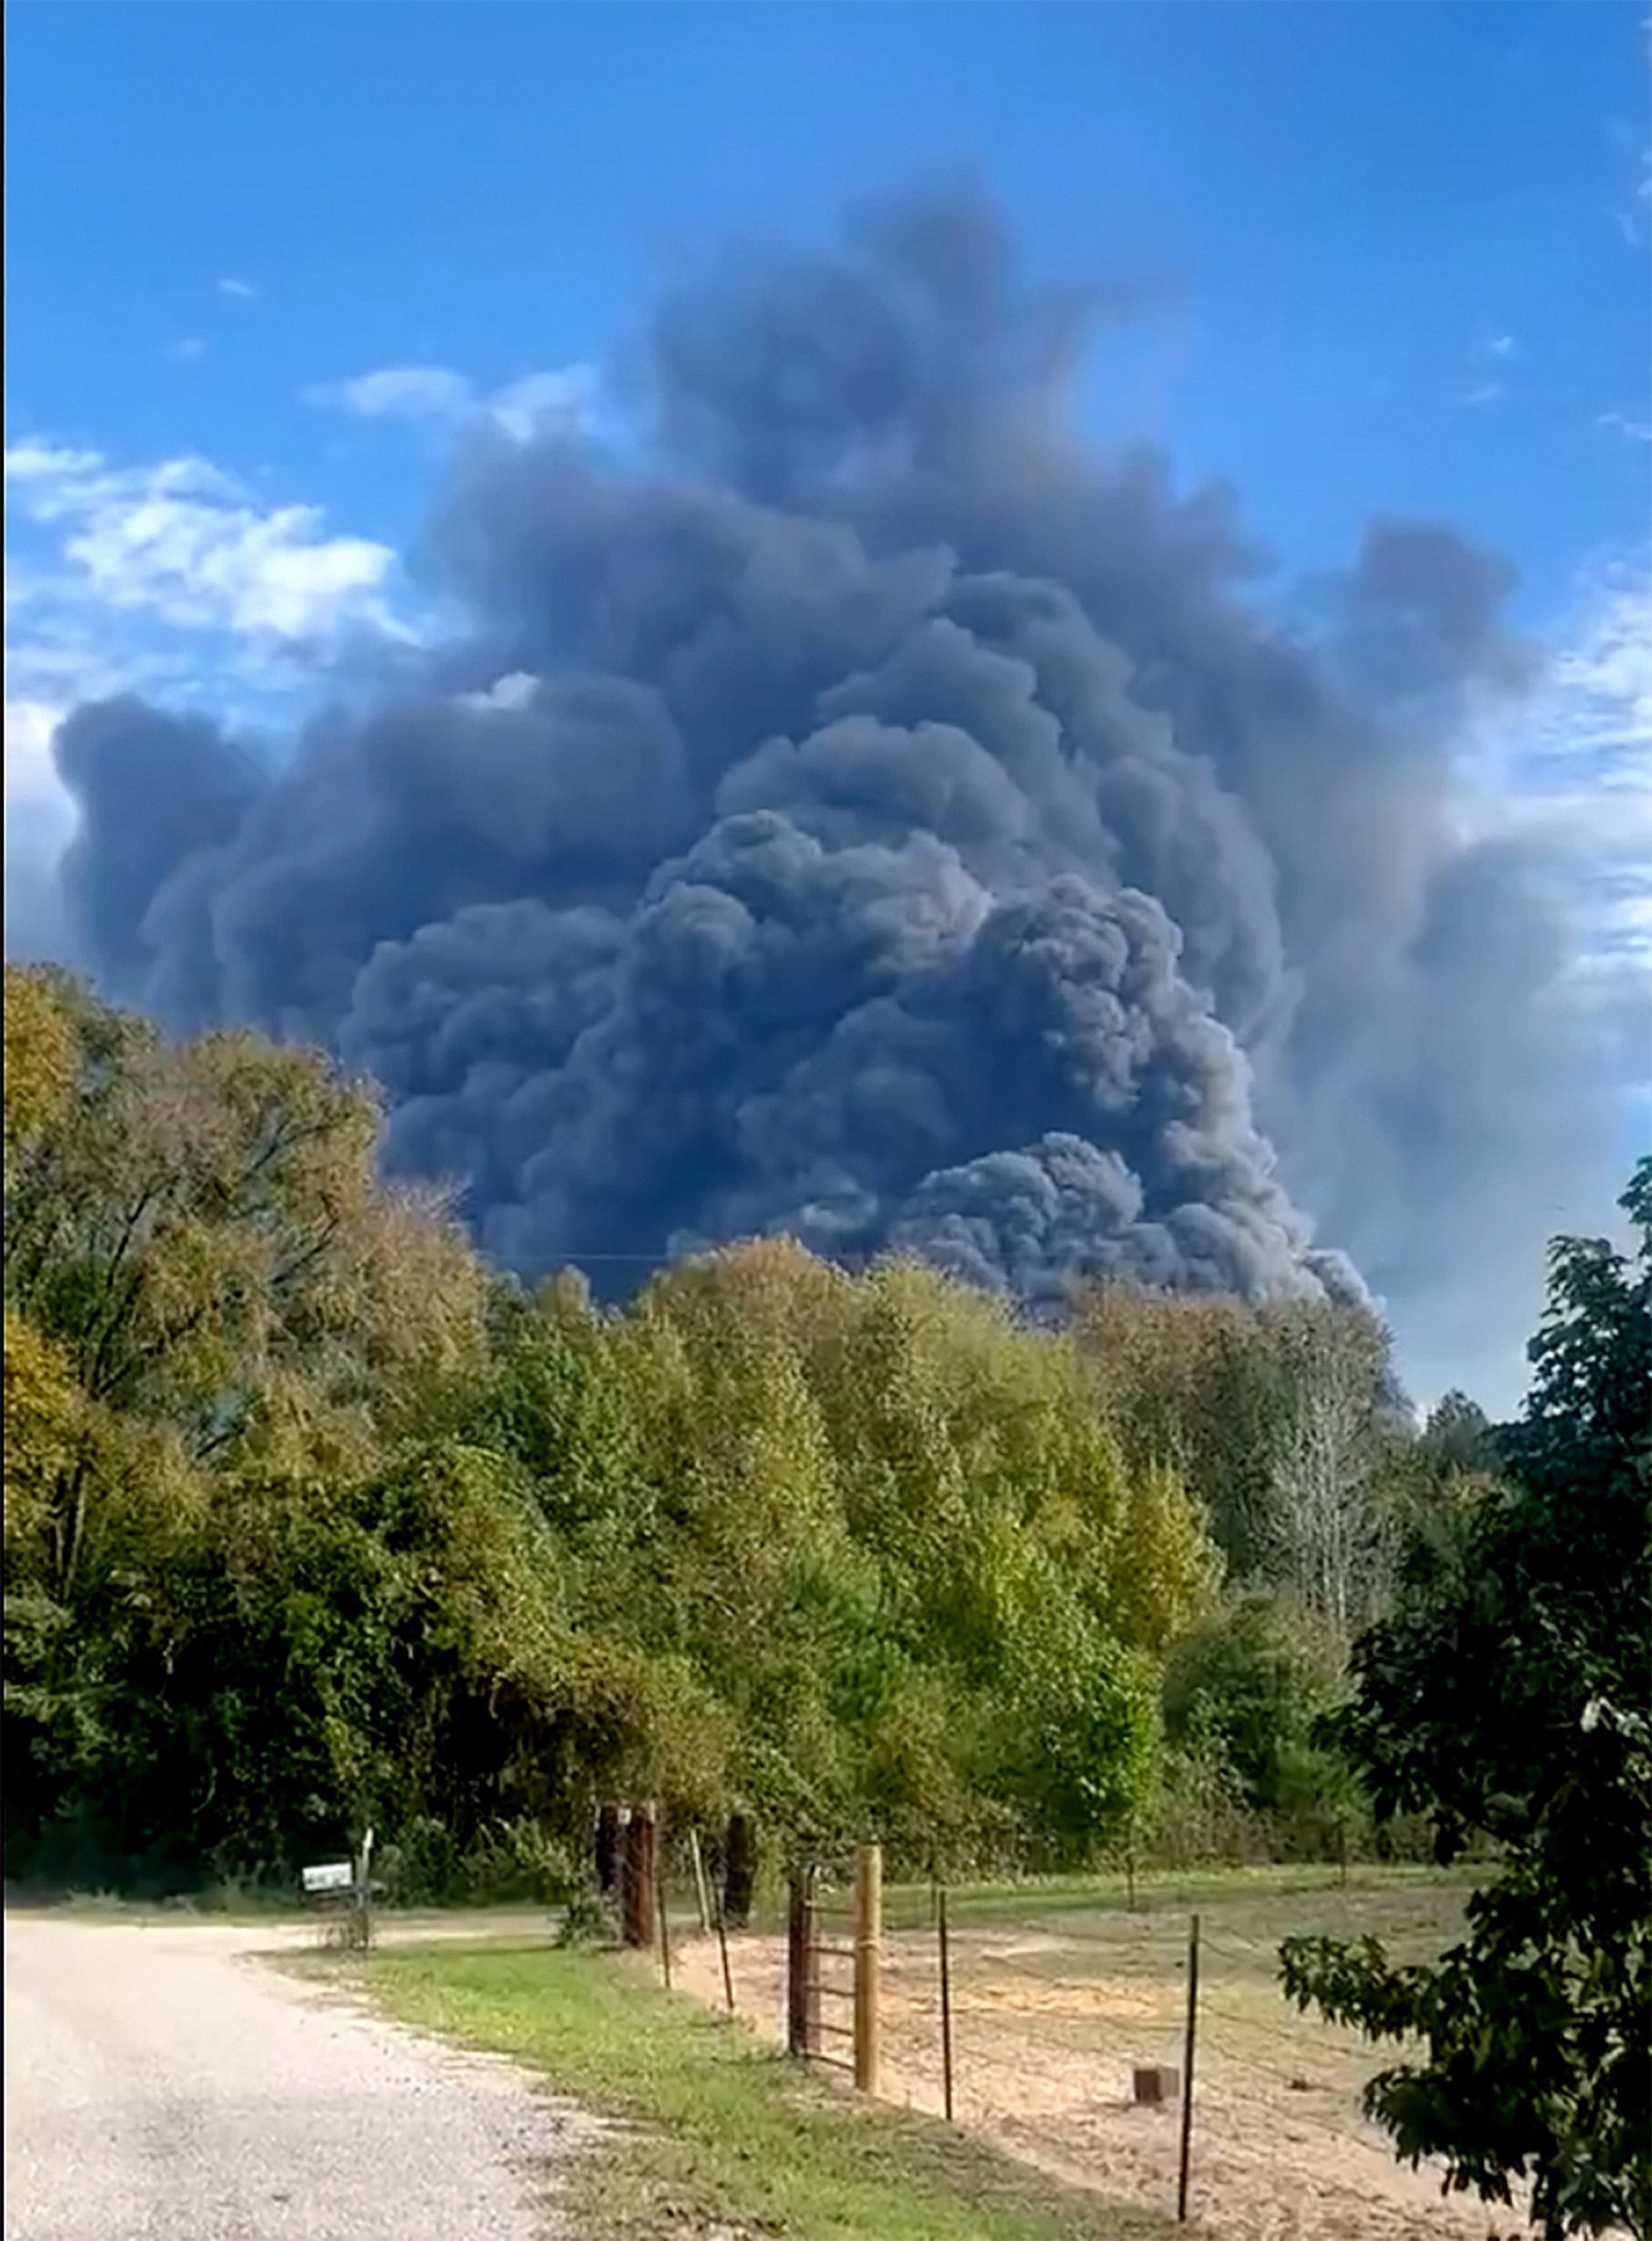 Breaking News: Massive Fire Erupts at Chemical Plant in Close Proximity to Houston